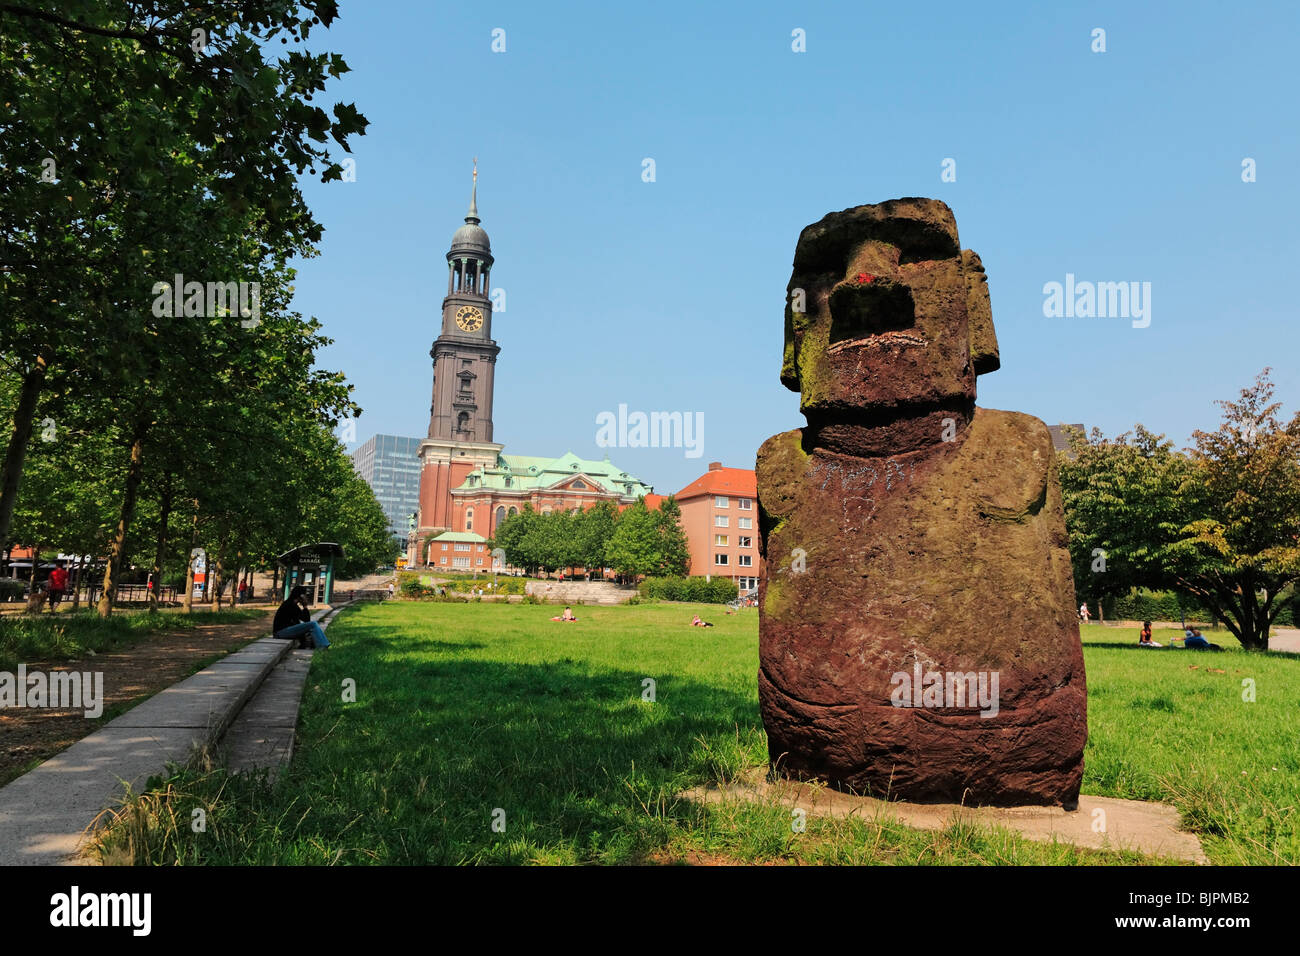 Angelito - replication of Moai Statue from Easter Island at Schaarmarkt, Hamburg, Germany Stock Photo